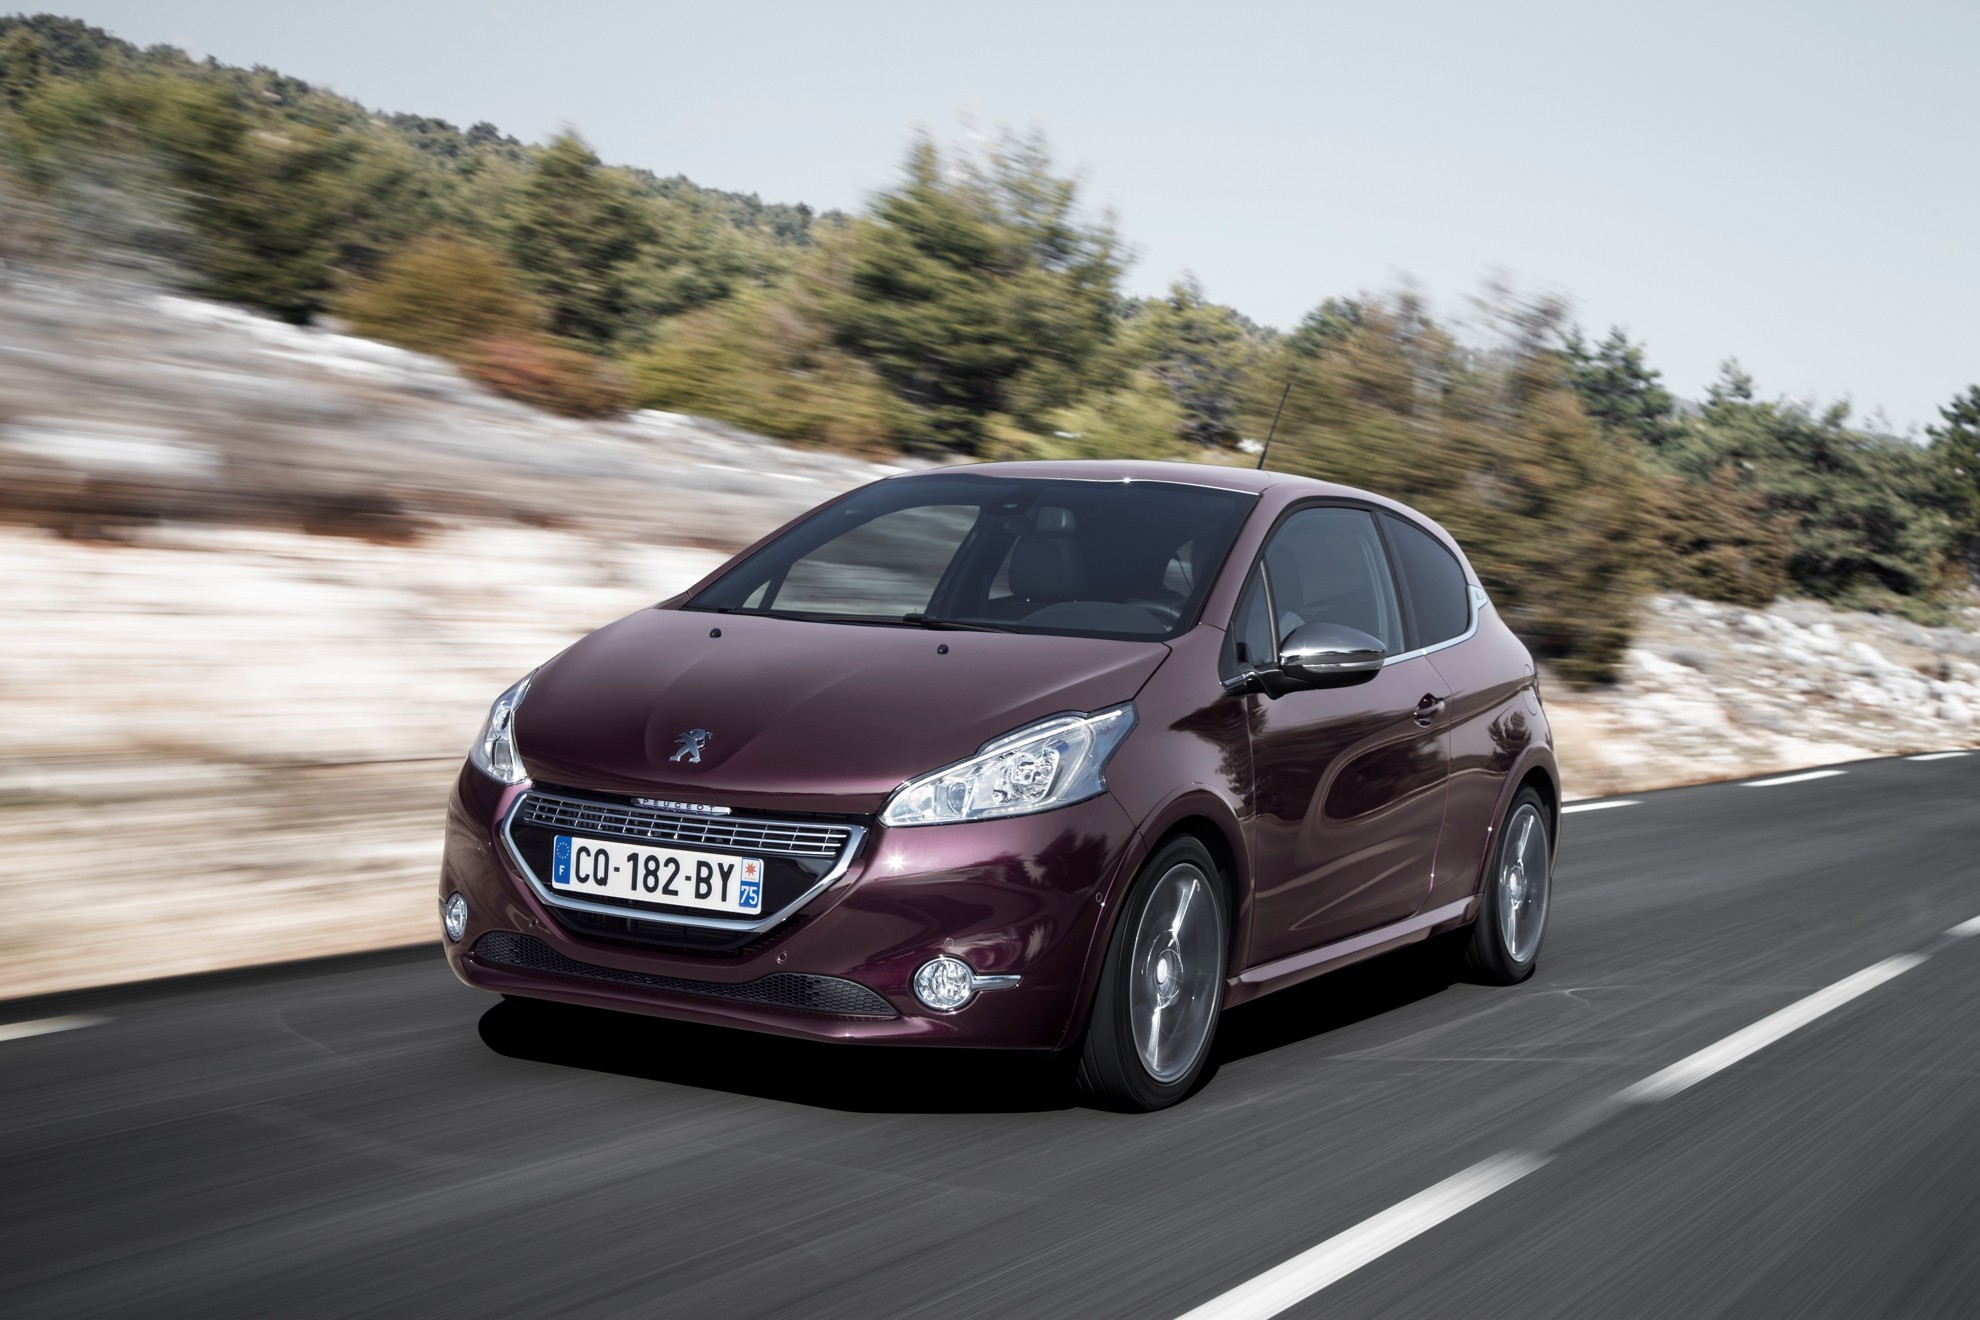 The Peugeot 208 leader in its category in Europe